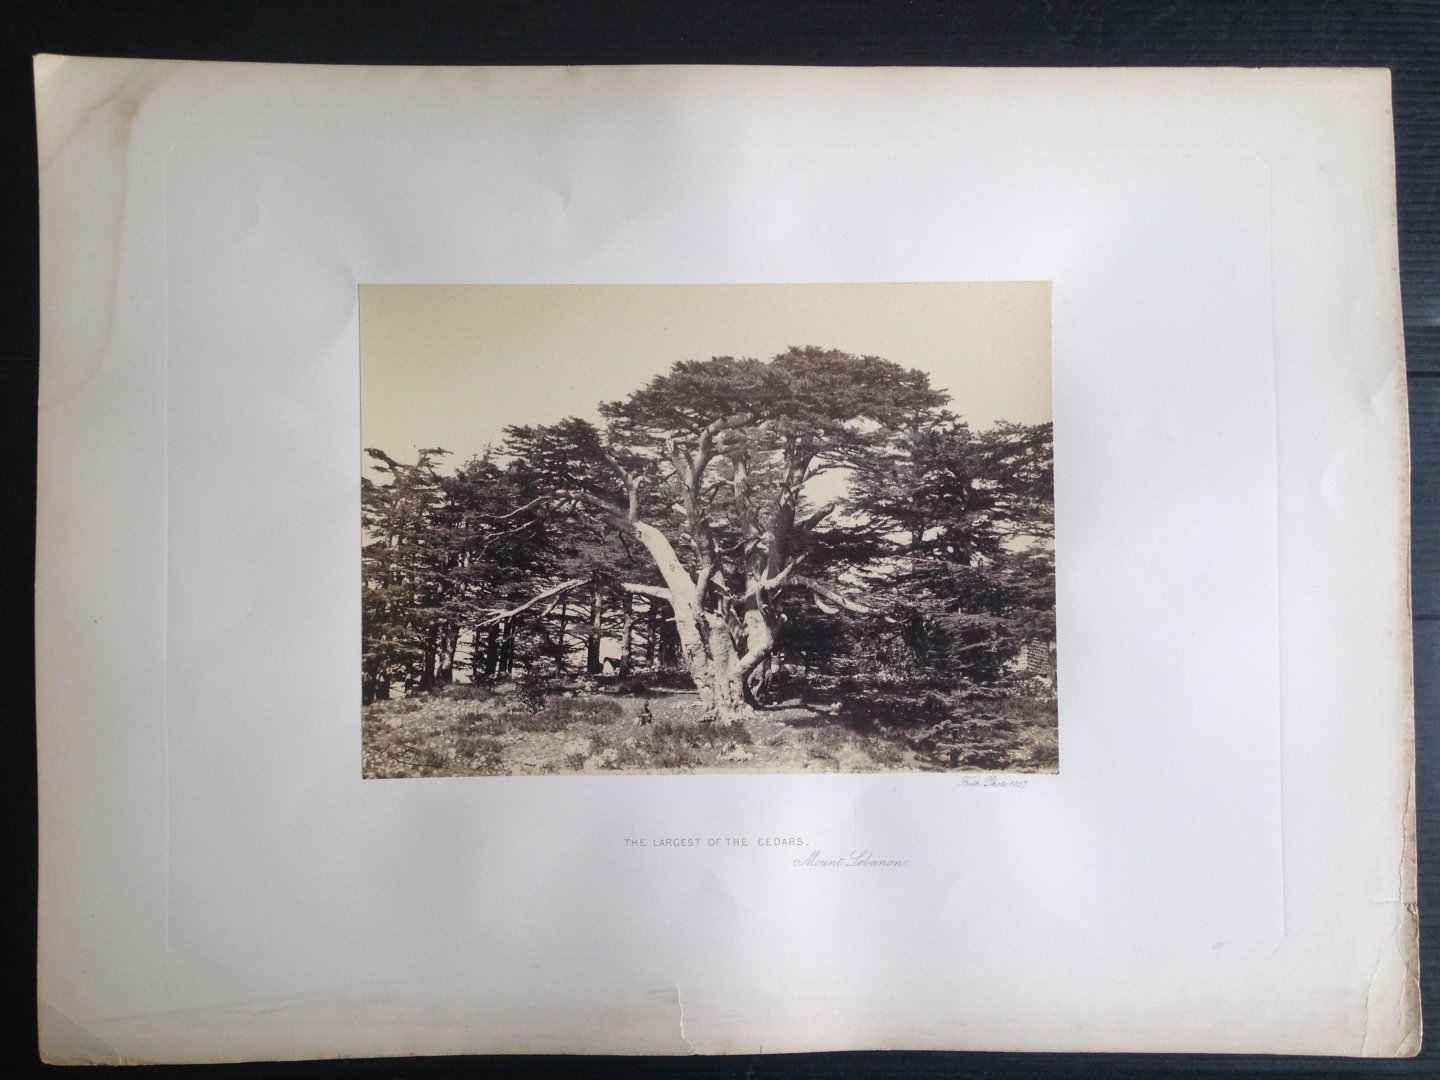 Frith, Francis - The Largest of the Cedars, Mount Lebanon, Series Egypt and Palestine